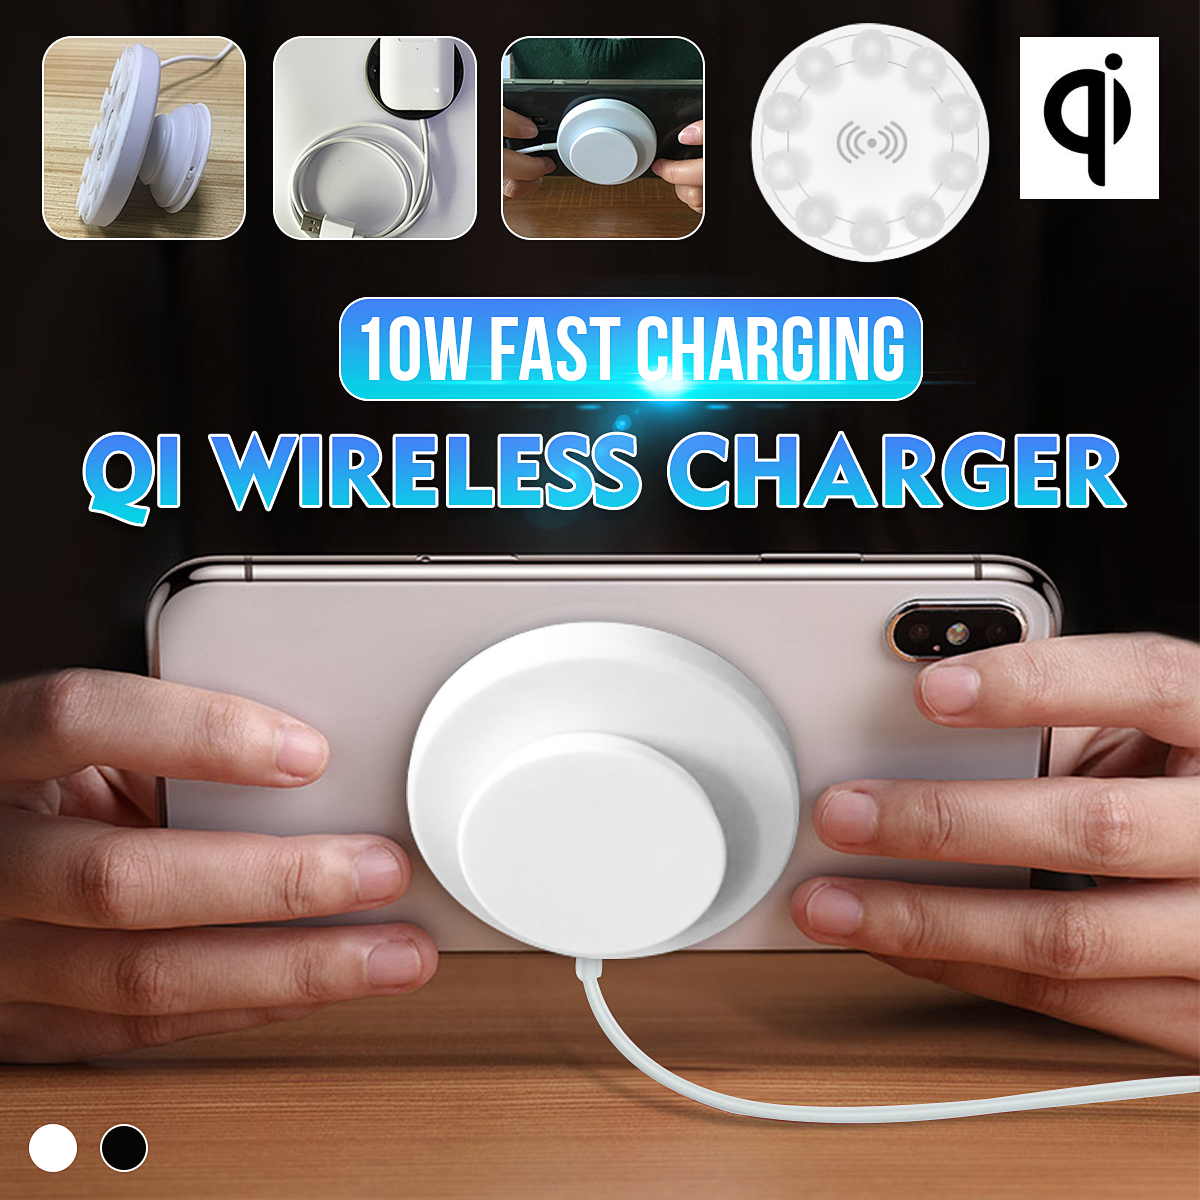 Bakeey-10W-Wireless-Charger-Suction-Wireless-Charging-For-iPhone-12-11Pro-MI10-1738939-1